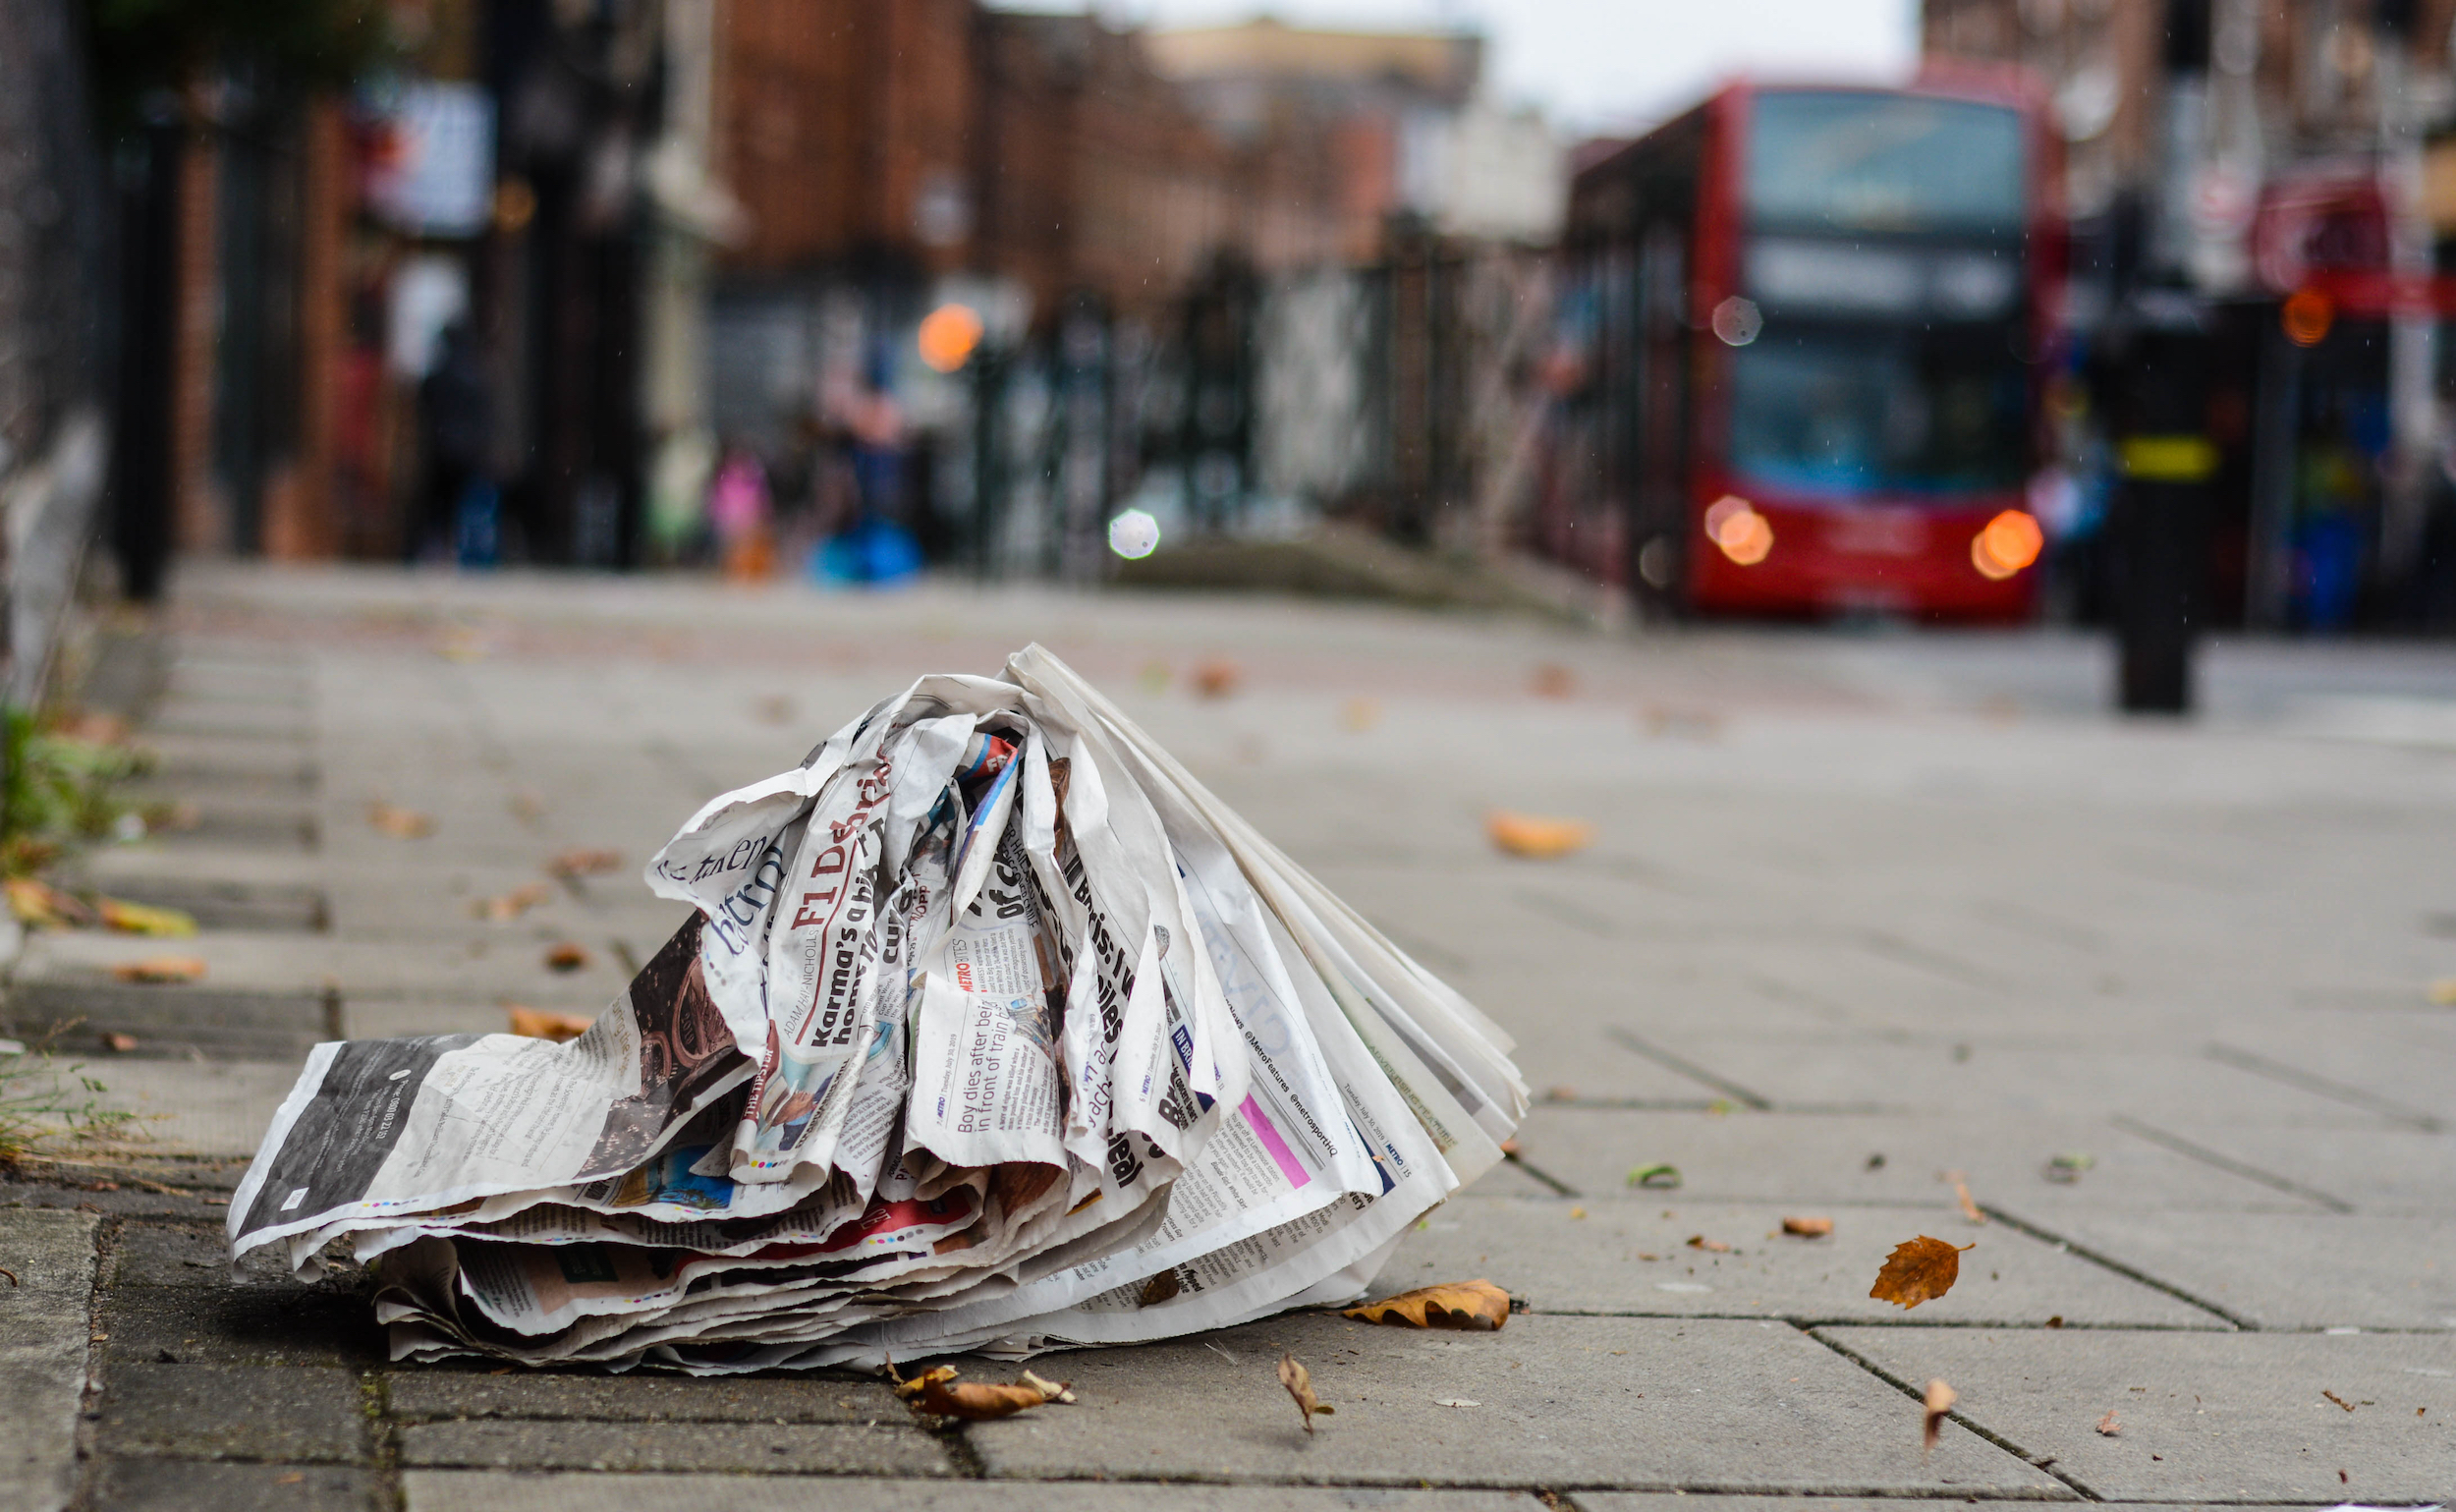 Are newspapers published and delivered on New Year's Day?